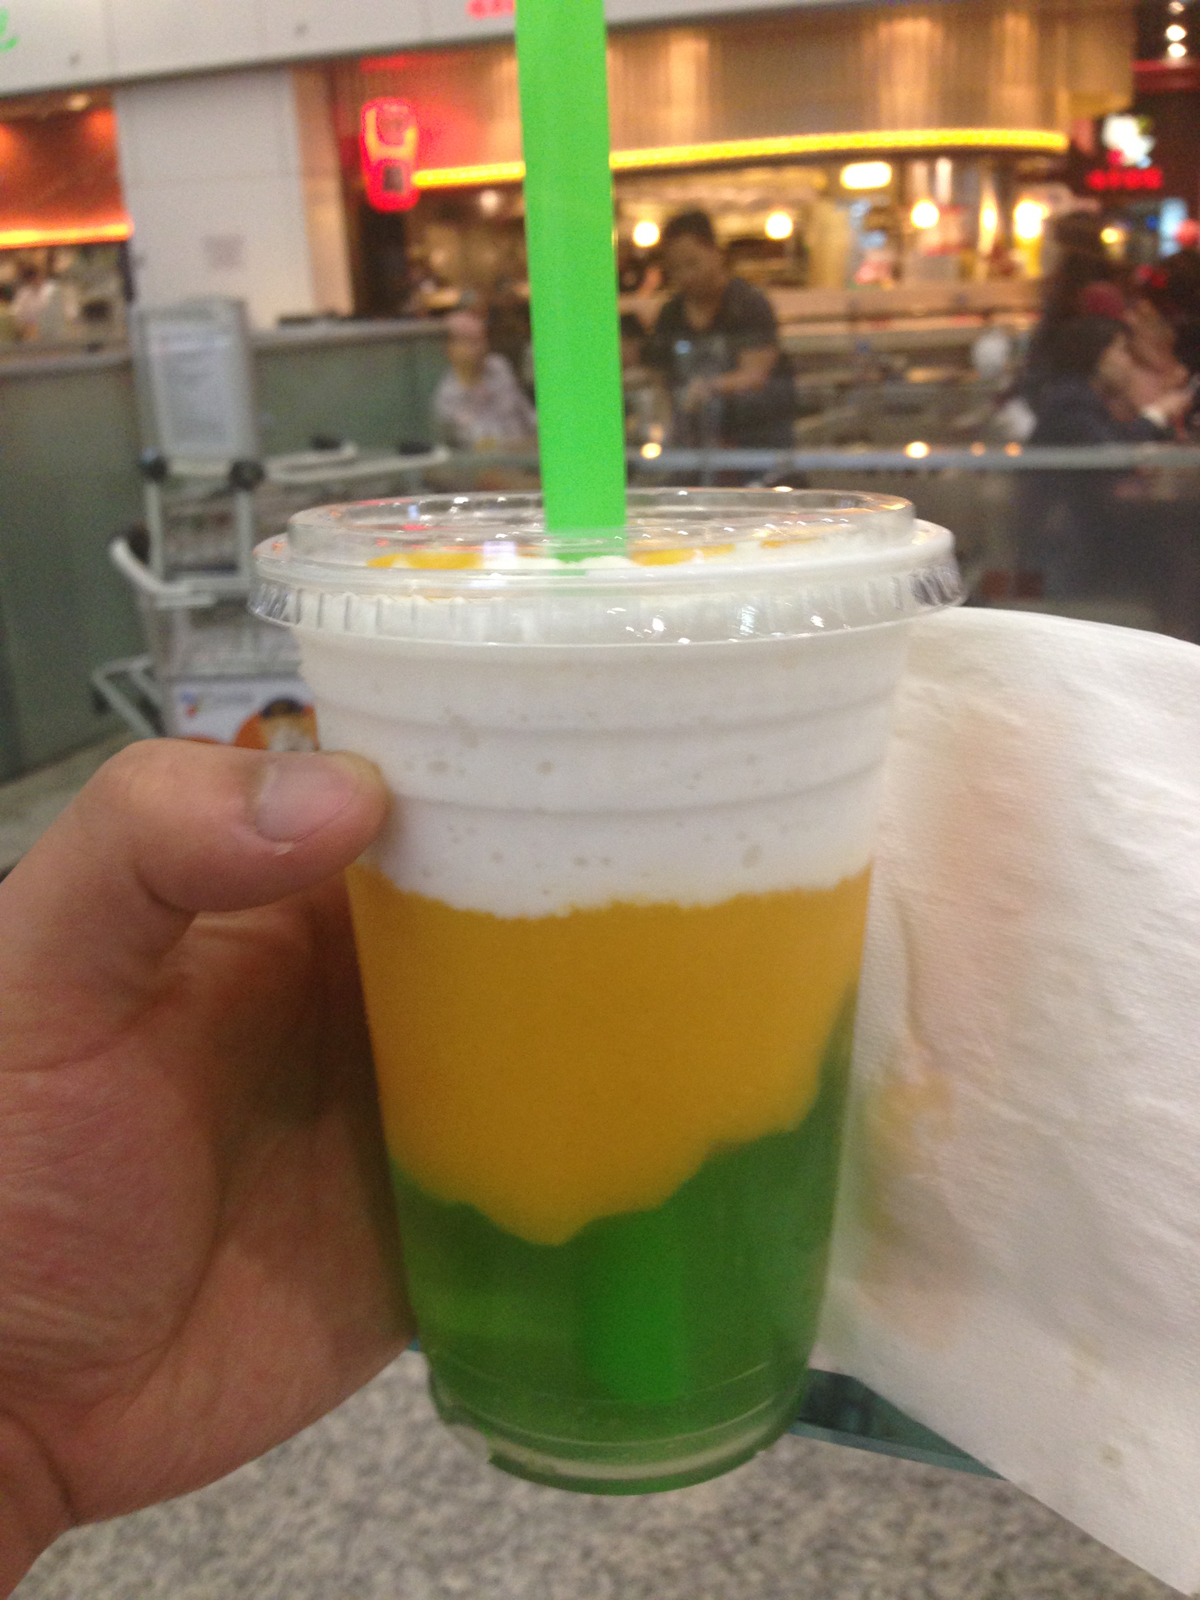 This was my favorite. It had coconut, mango, and aloe jelly. So good!